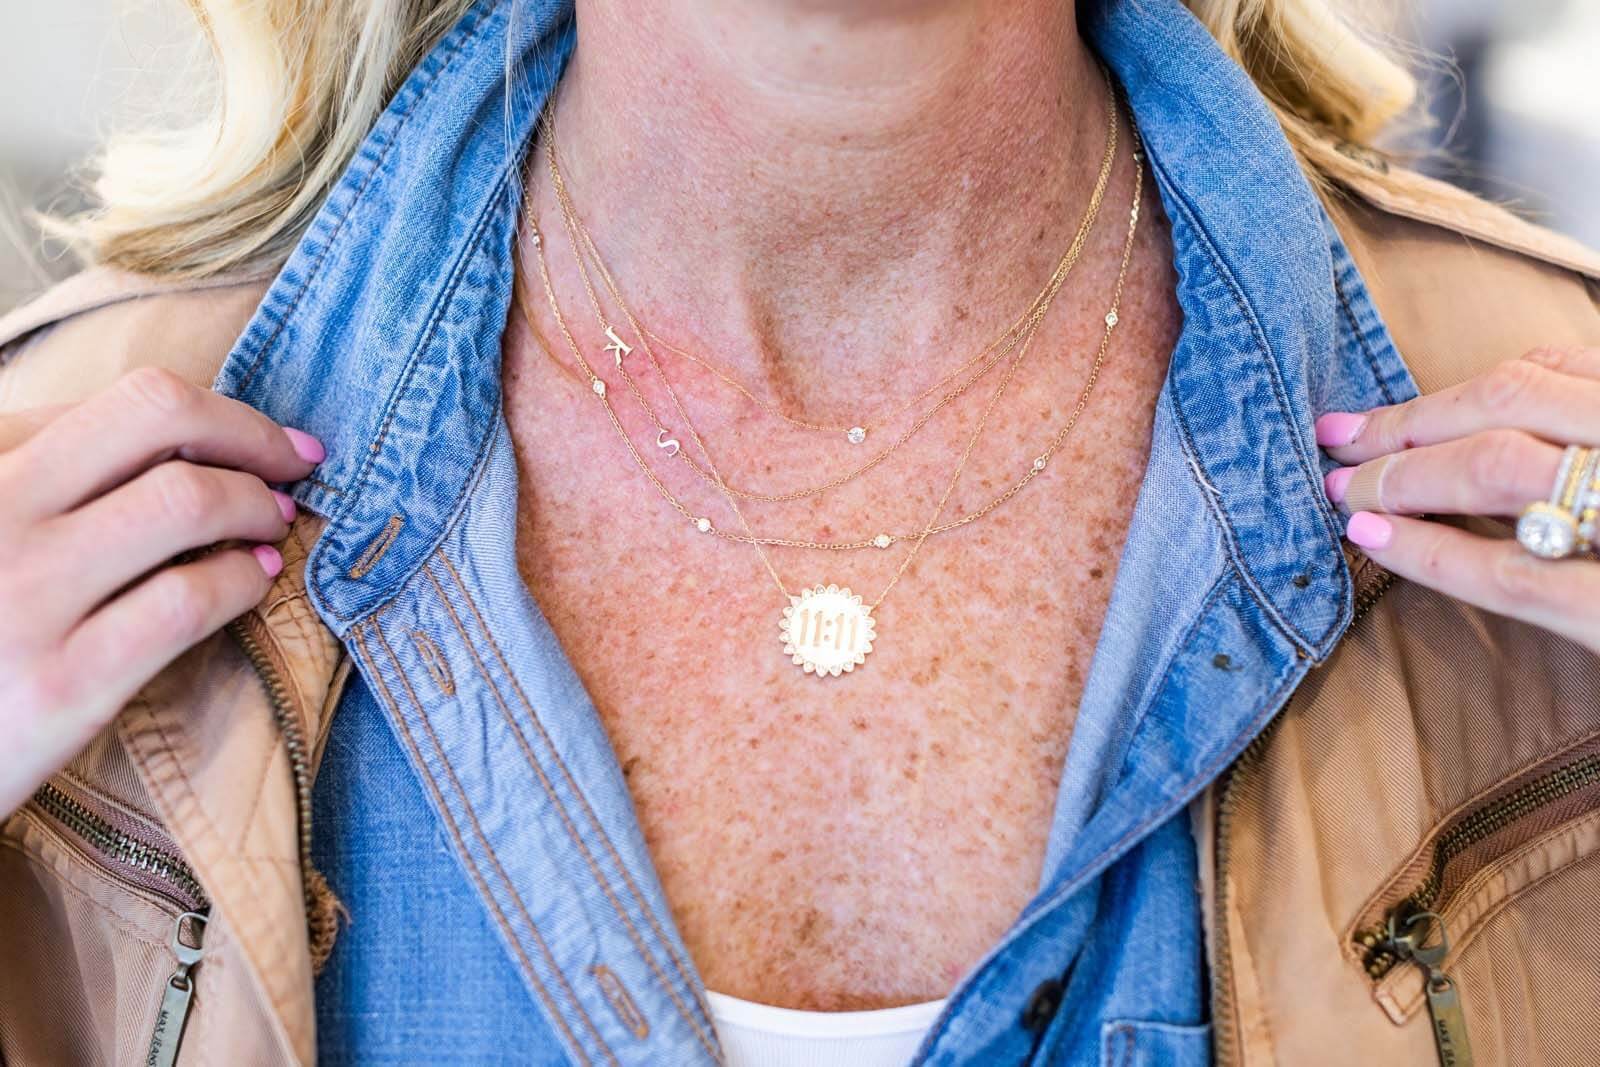 2020 Jewelry Trend: layering necklaces and using personalized charms or pendants